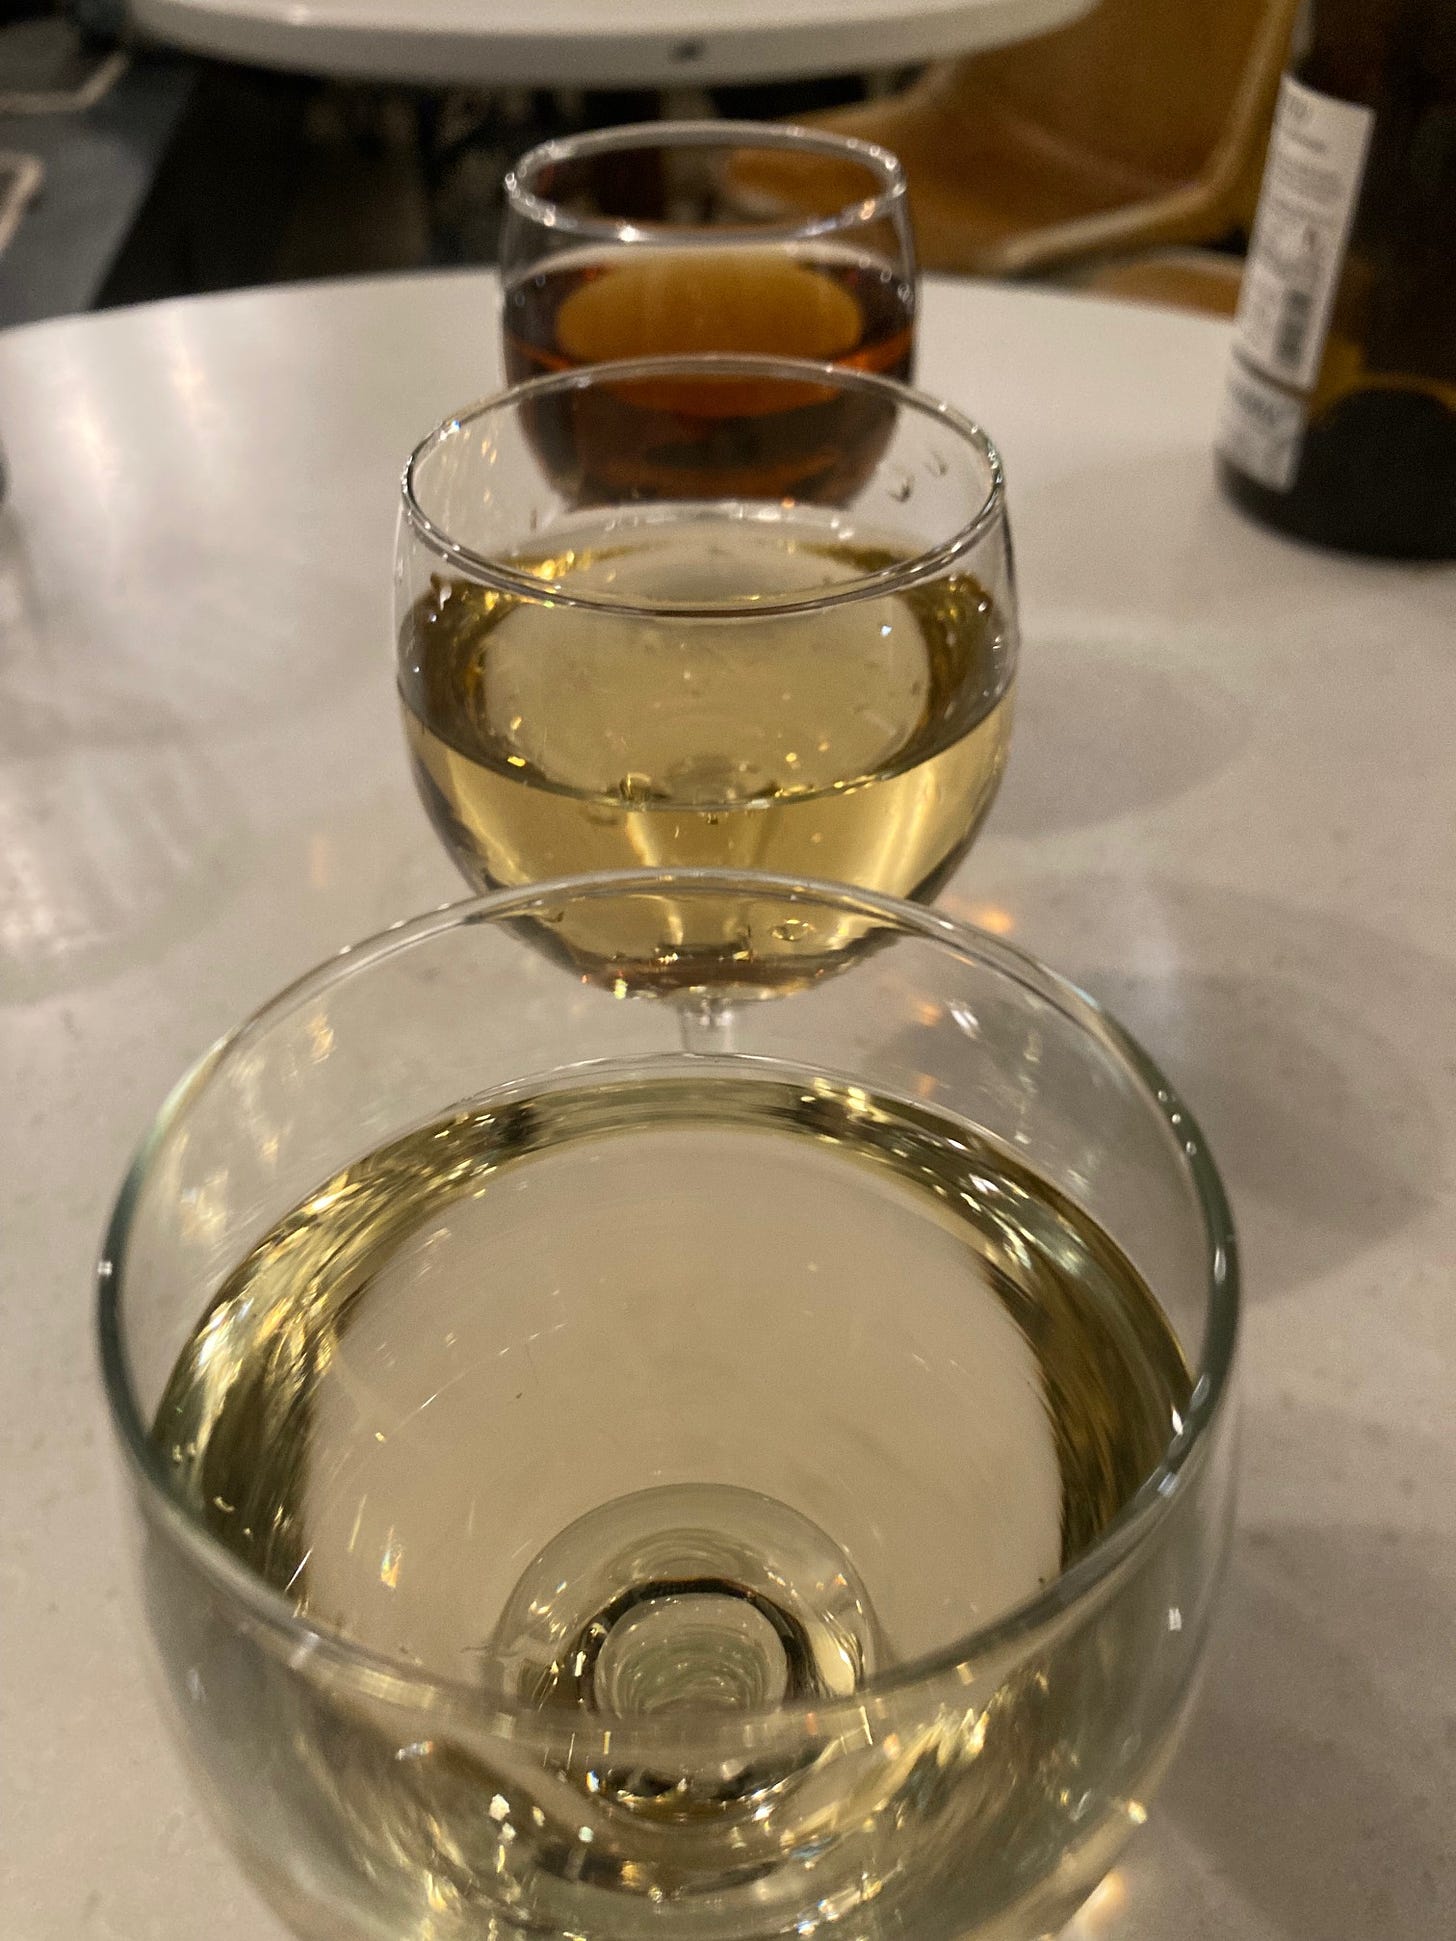 Three glasses of sherry, all different in colour, stand one behind each other on a table.